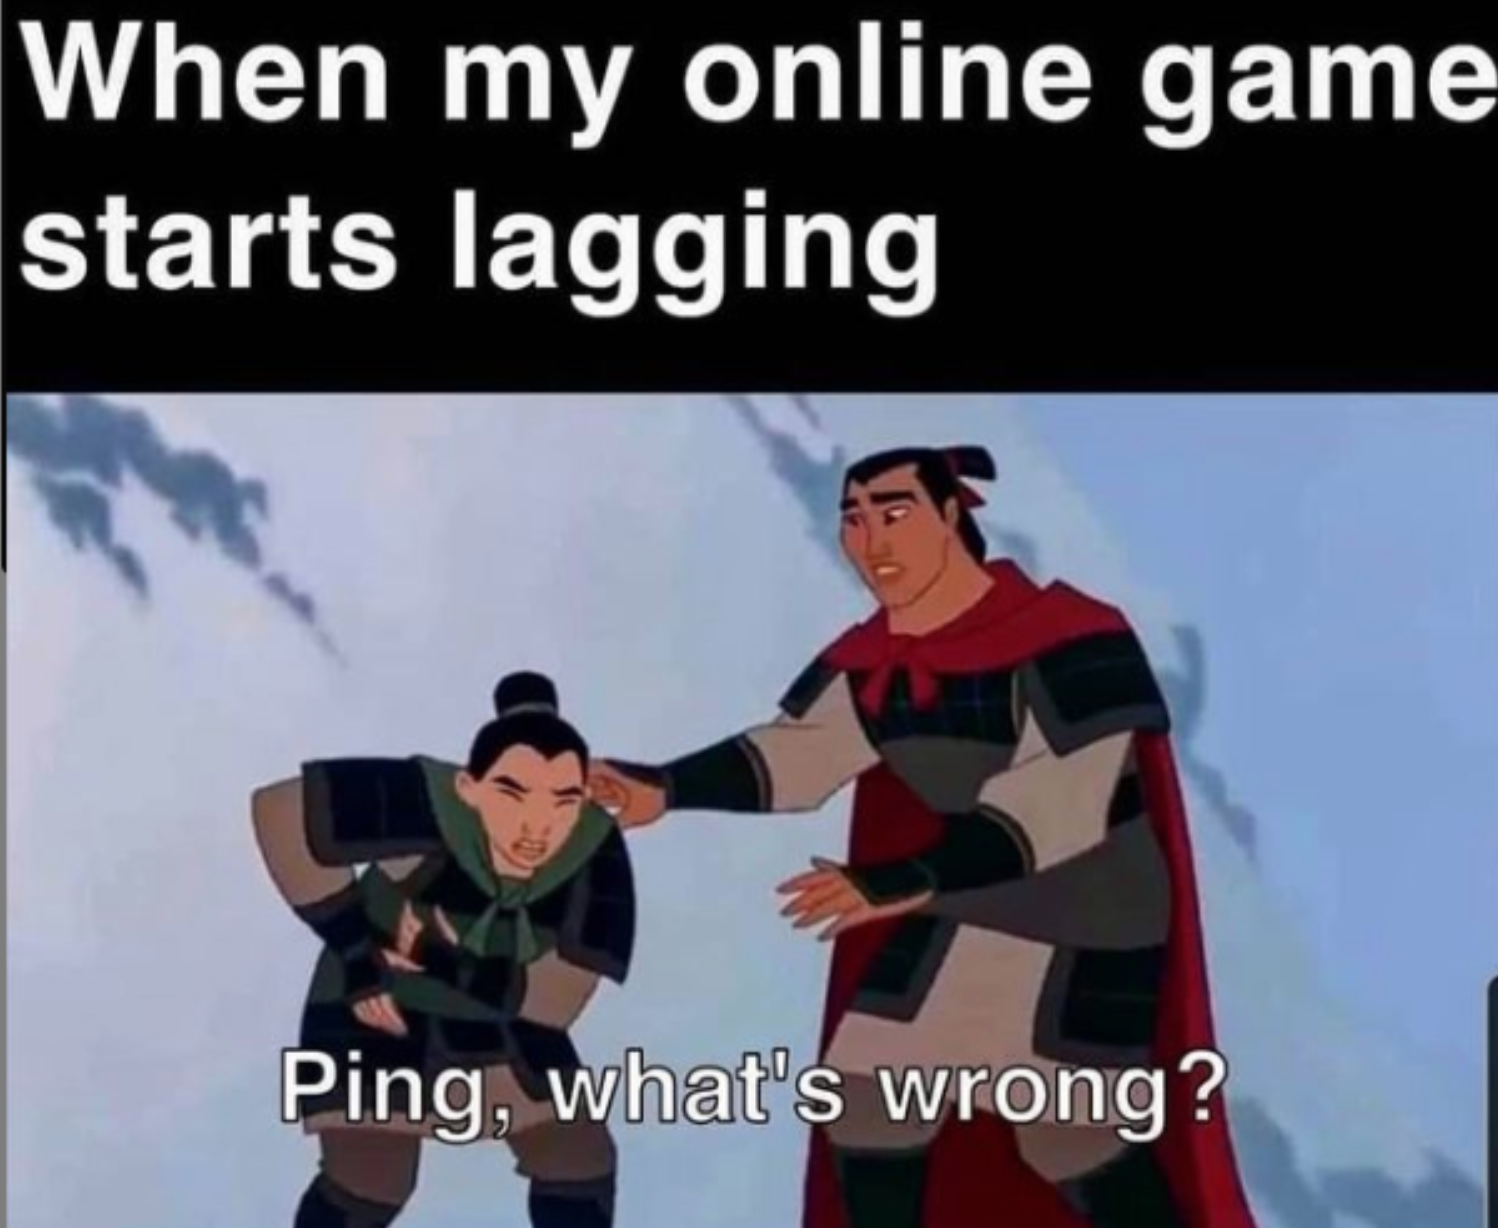 gaming memes - Online game - When my online game starts lagging Ping, what's wrong?